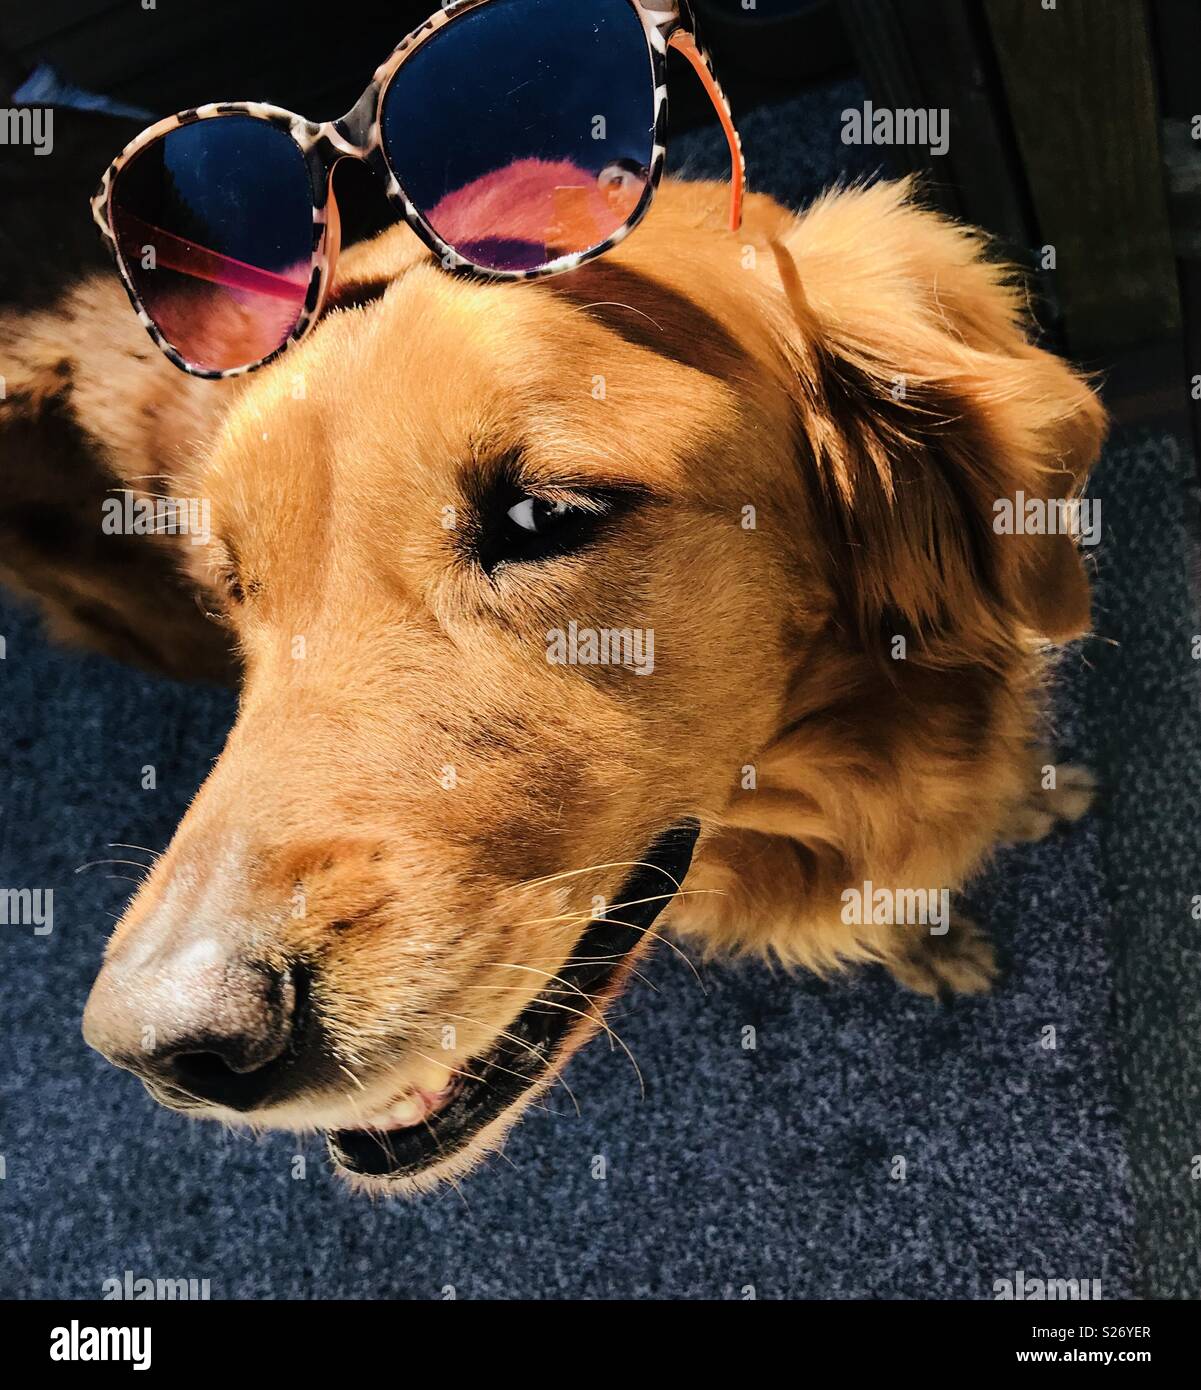 dog with sunglasses on